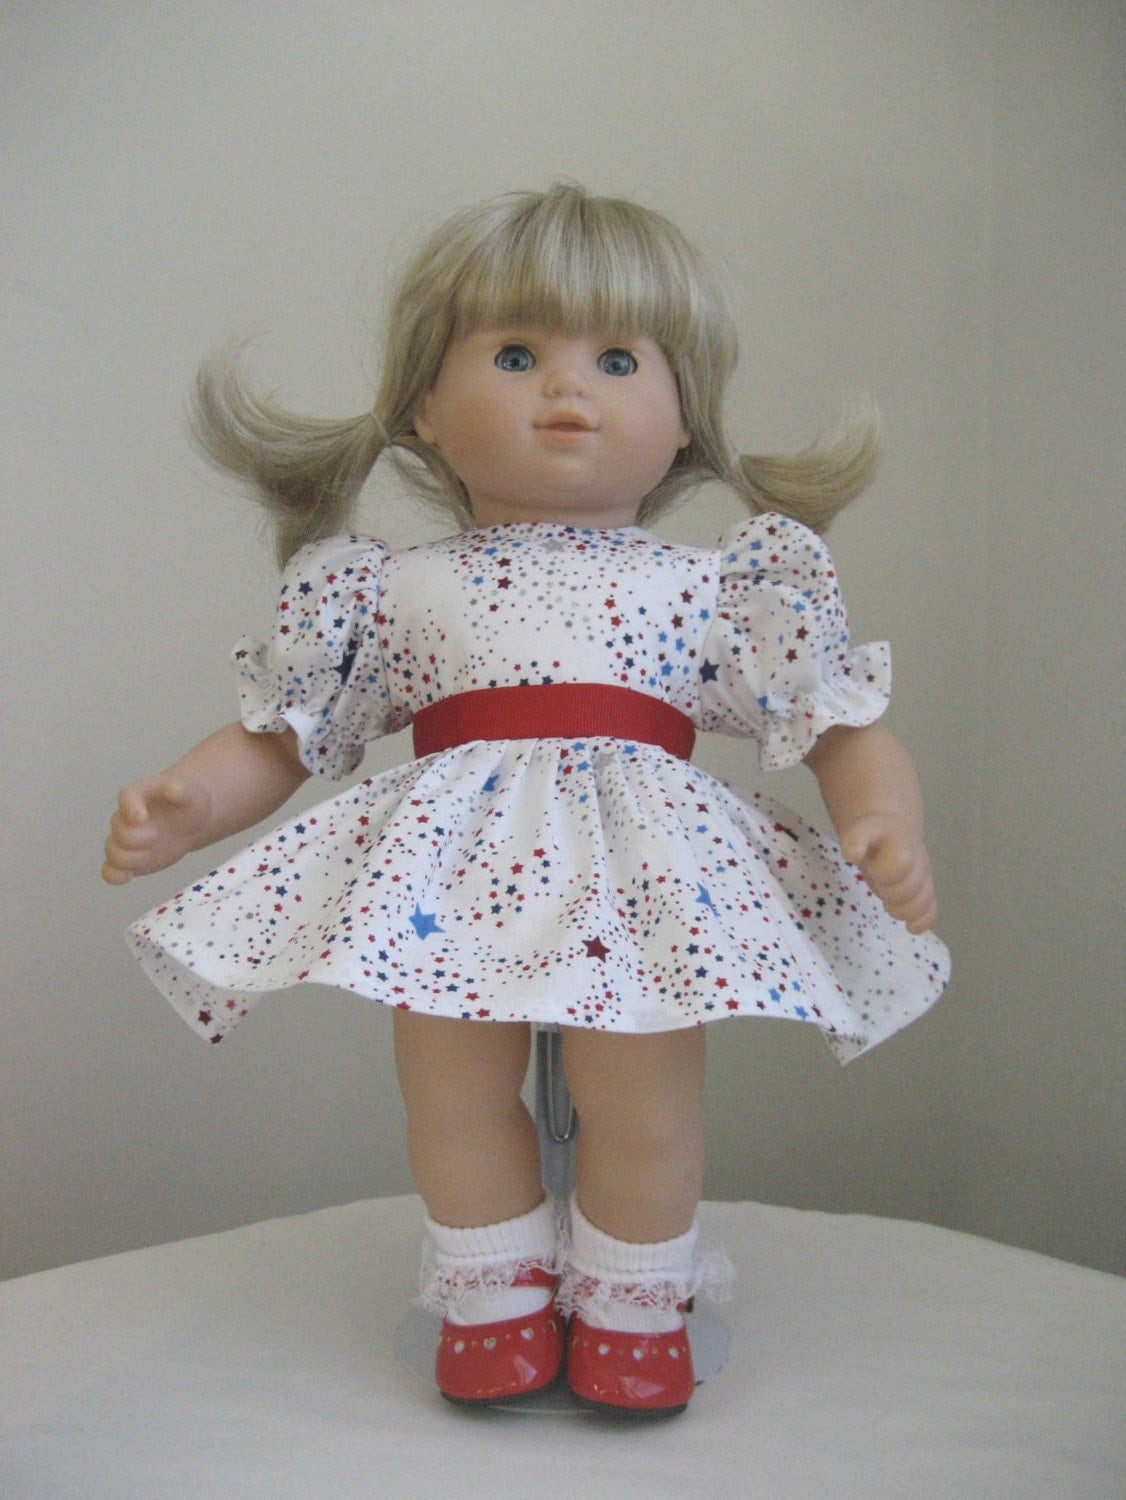 Buy Doll Clothes made for Bitty Baby Dolls Patriotic Dress Fits